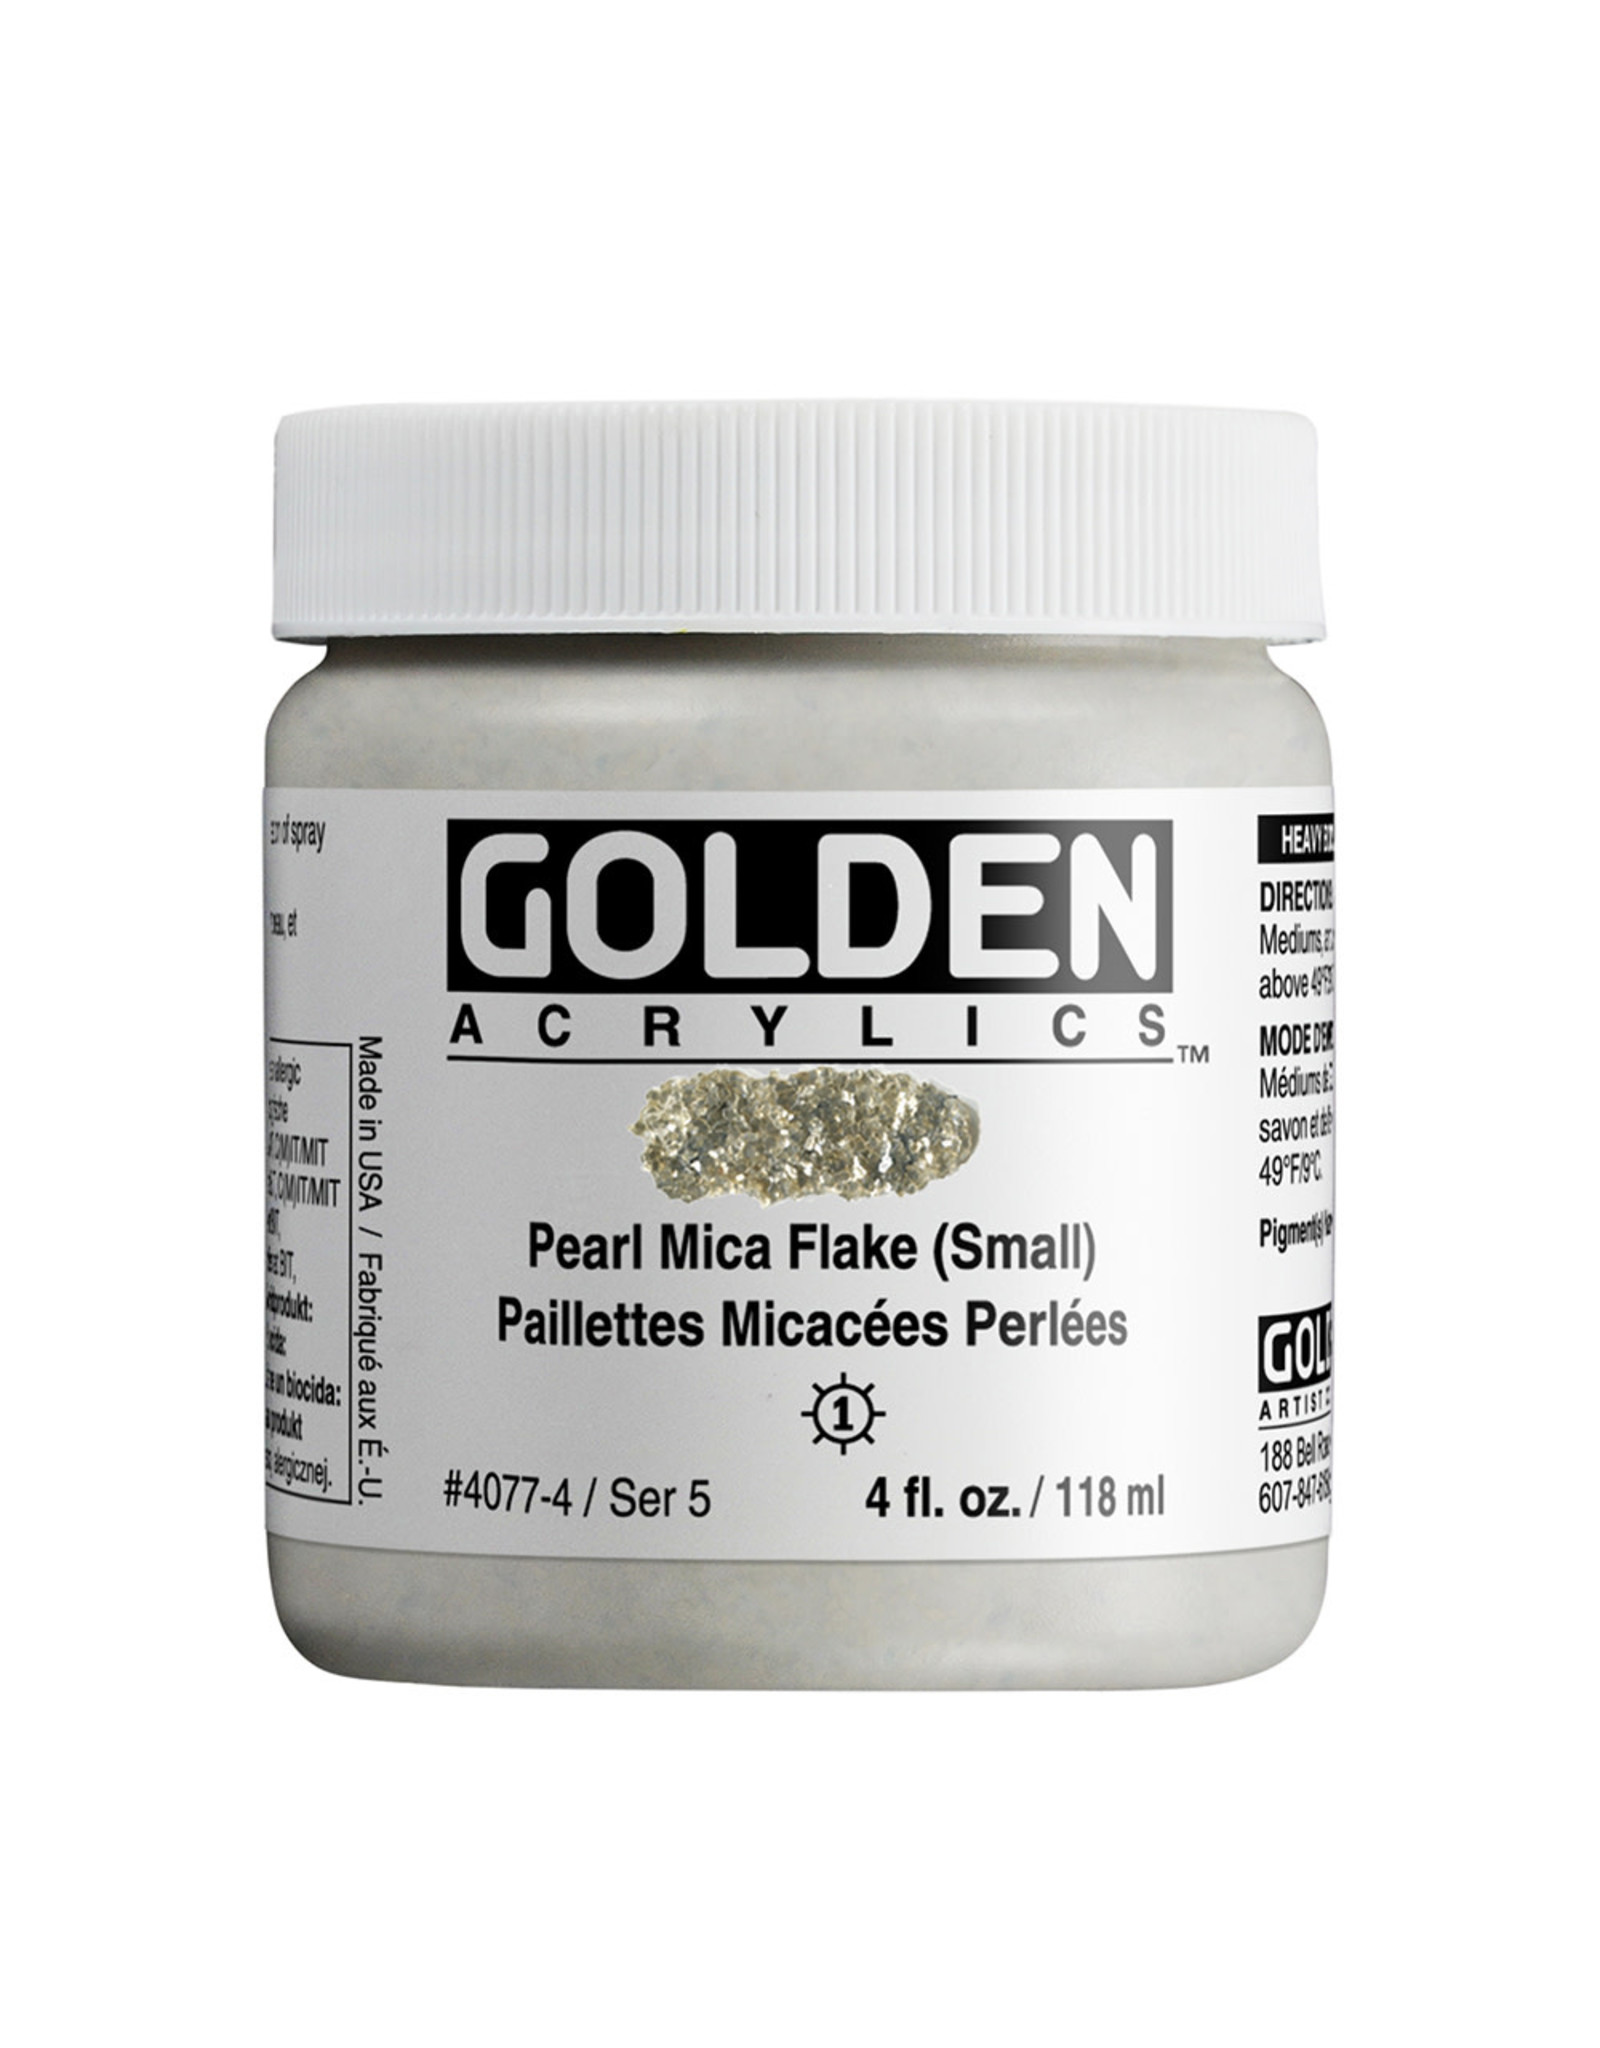 Golden Golden Heavy Body Acrylic Paint, Pearl Mica Flake Small, 4oz